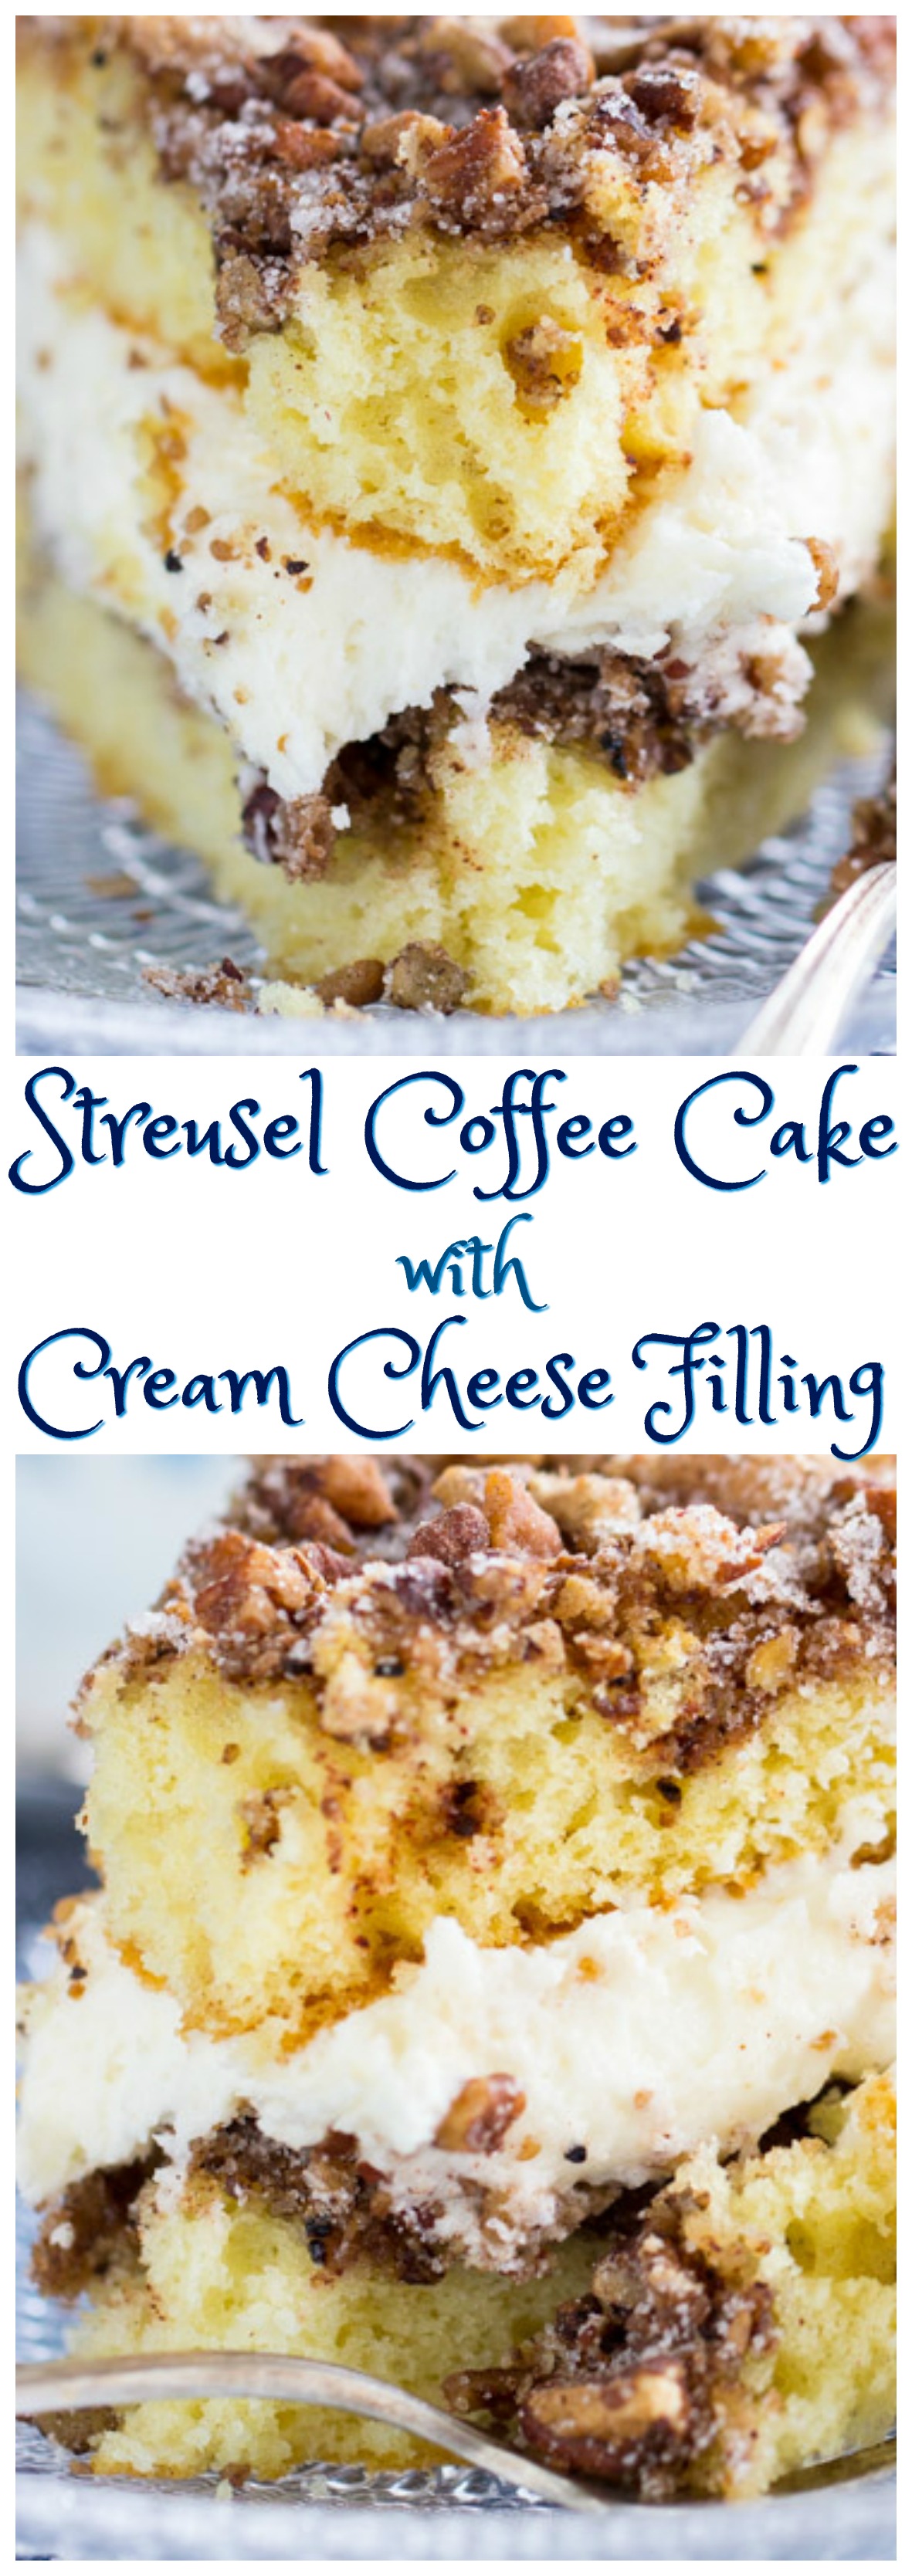 Layered Cinnamon Streusel Coffee Cake with Cream Cheese Filling